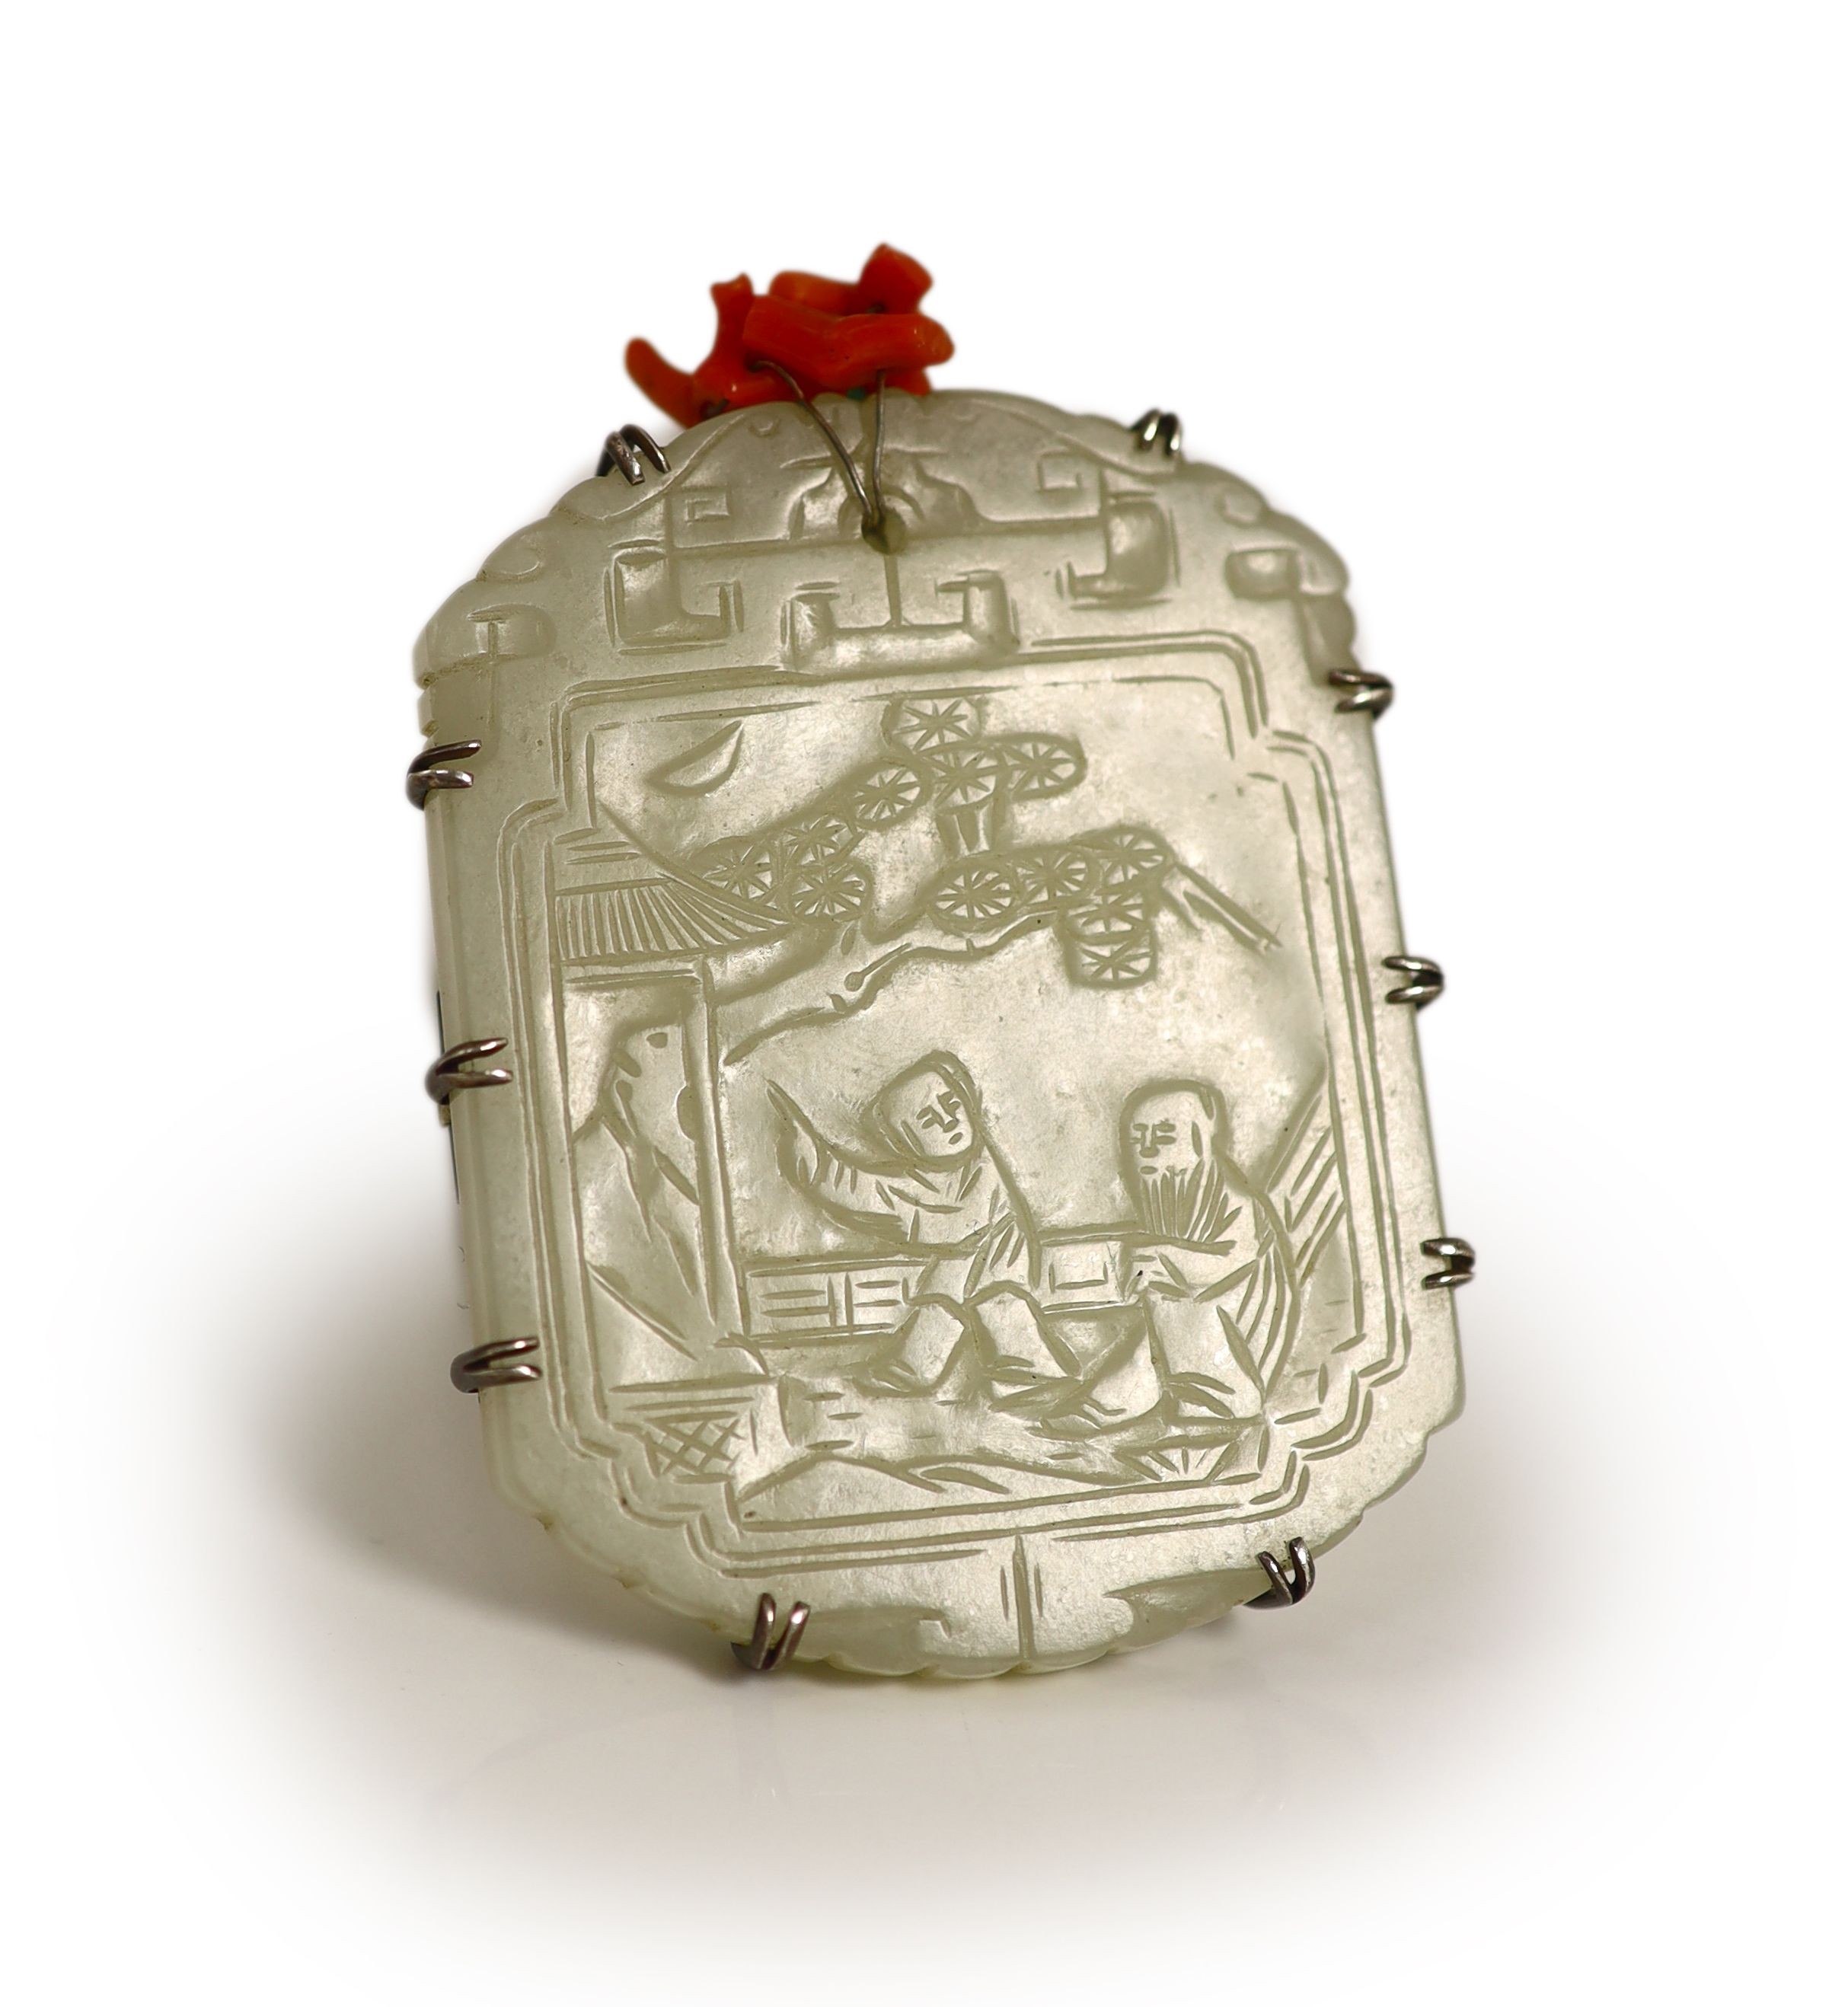 A Chinese pale celadon jade plaque, 19th century, 5.5 cm high, later white metal brooch mount